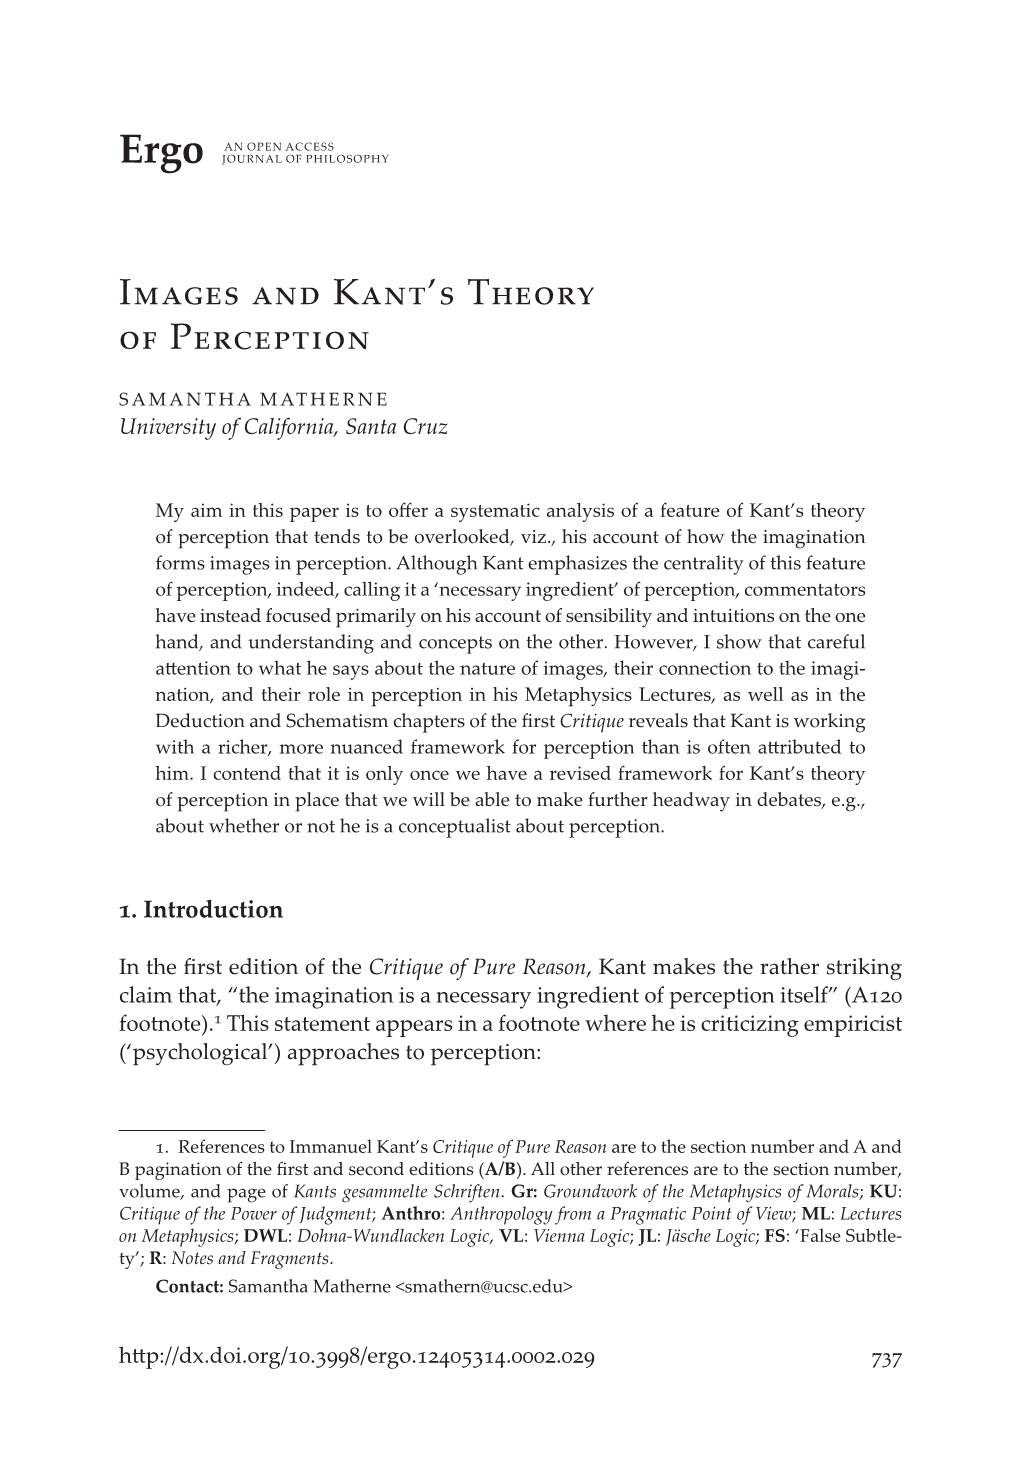 Images and Kant's Theory of Perception